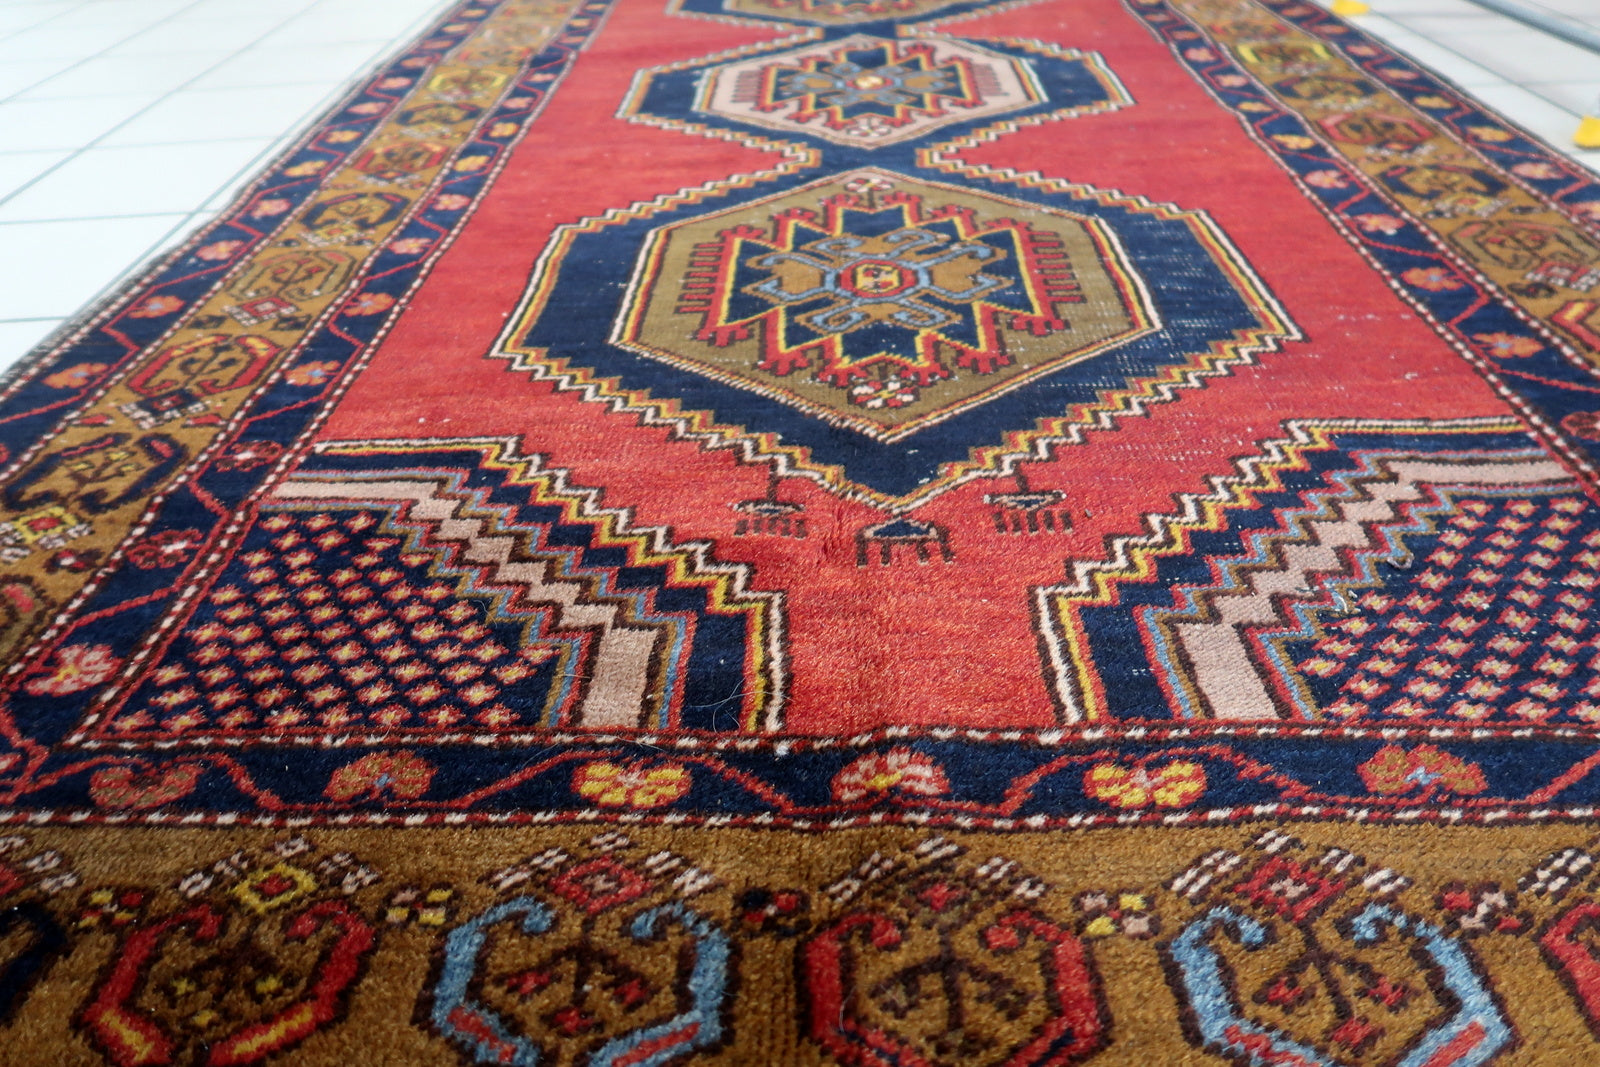 Artistic display of the rug as a focal point in a study, showcasing its vintage allure